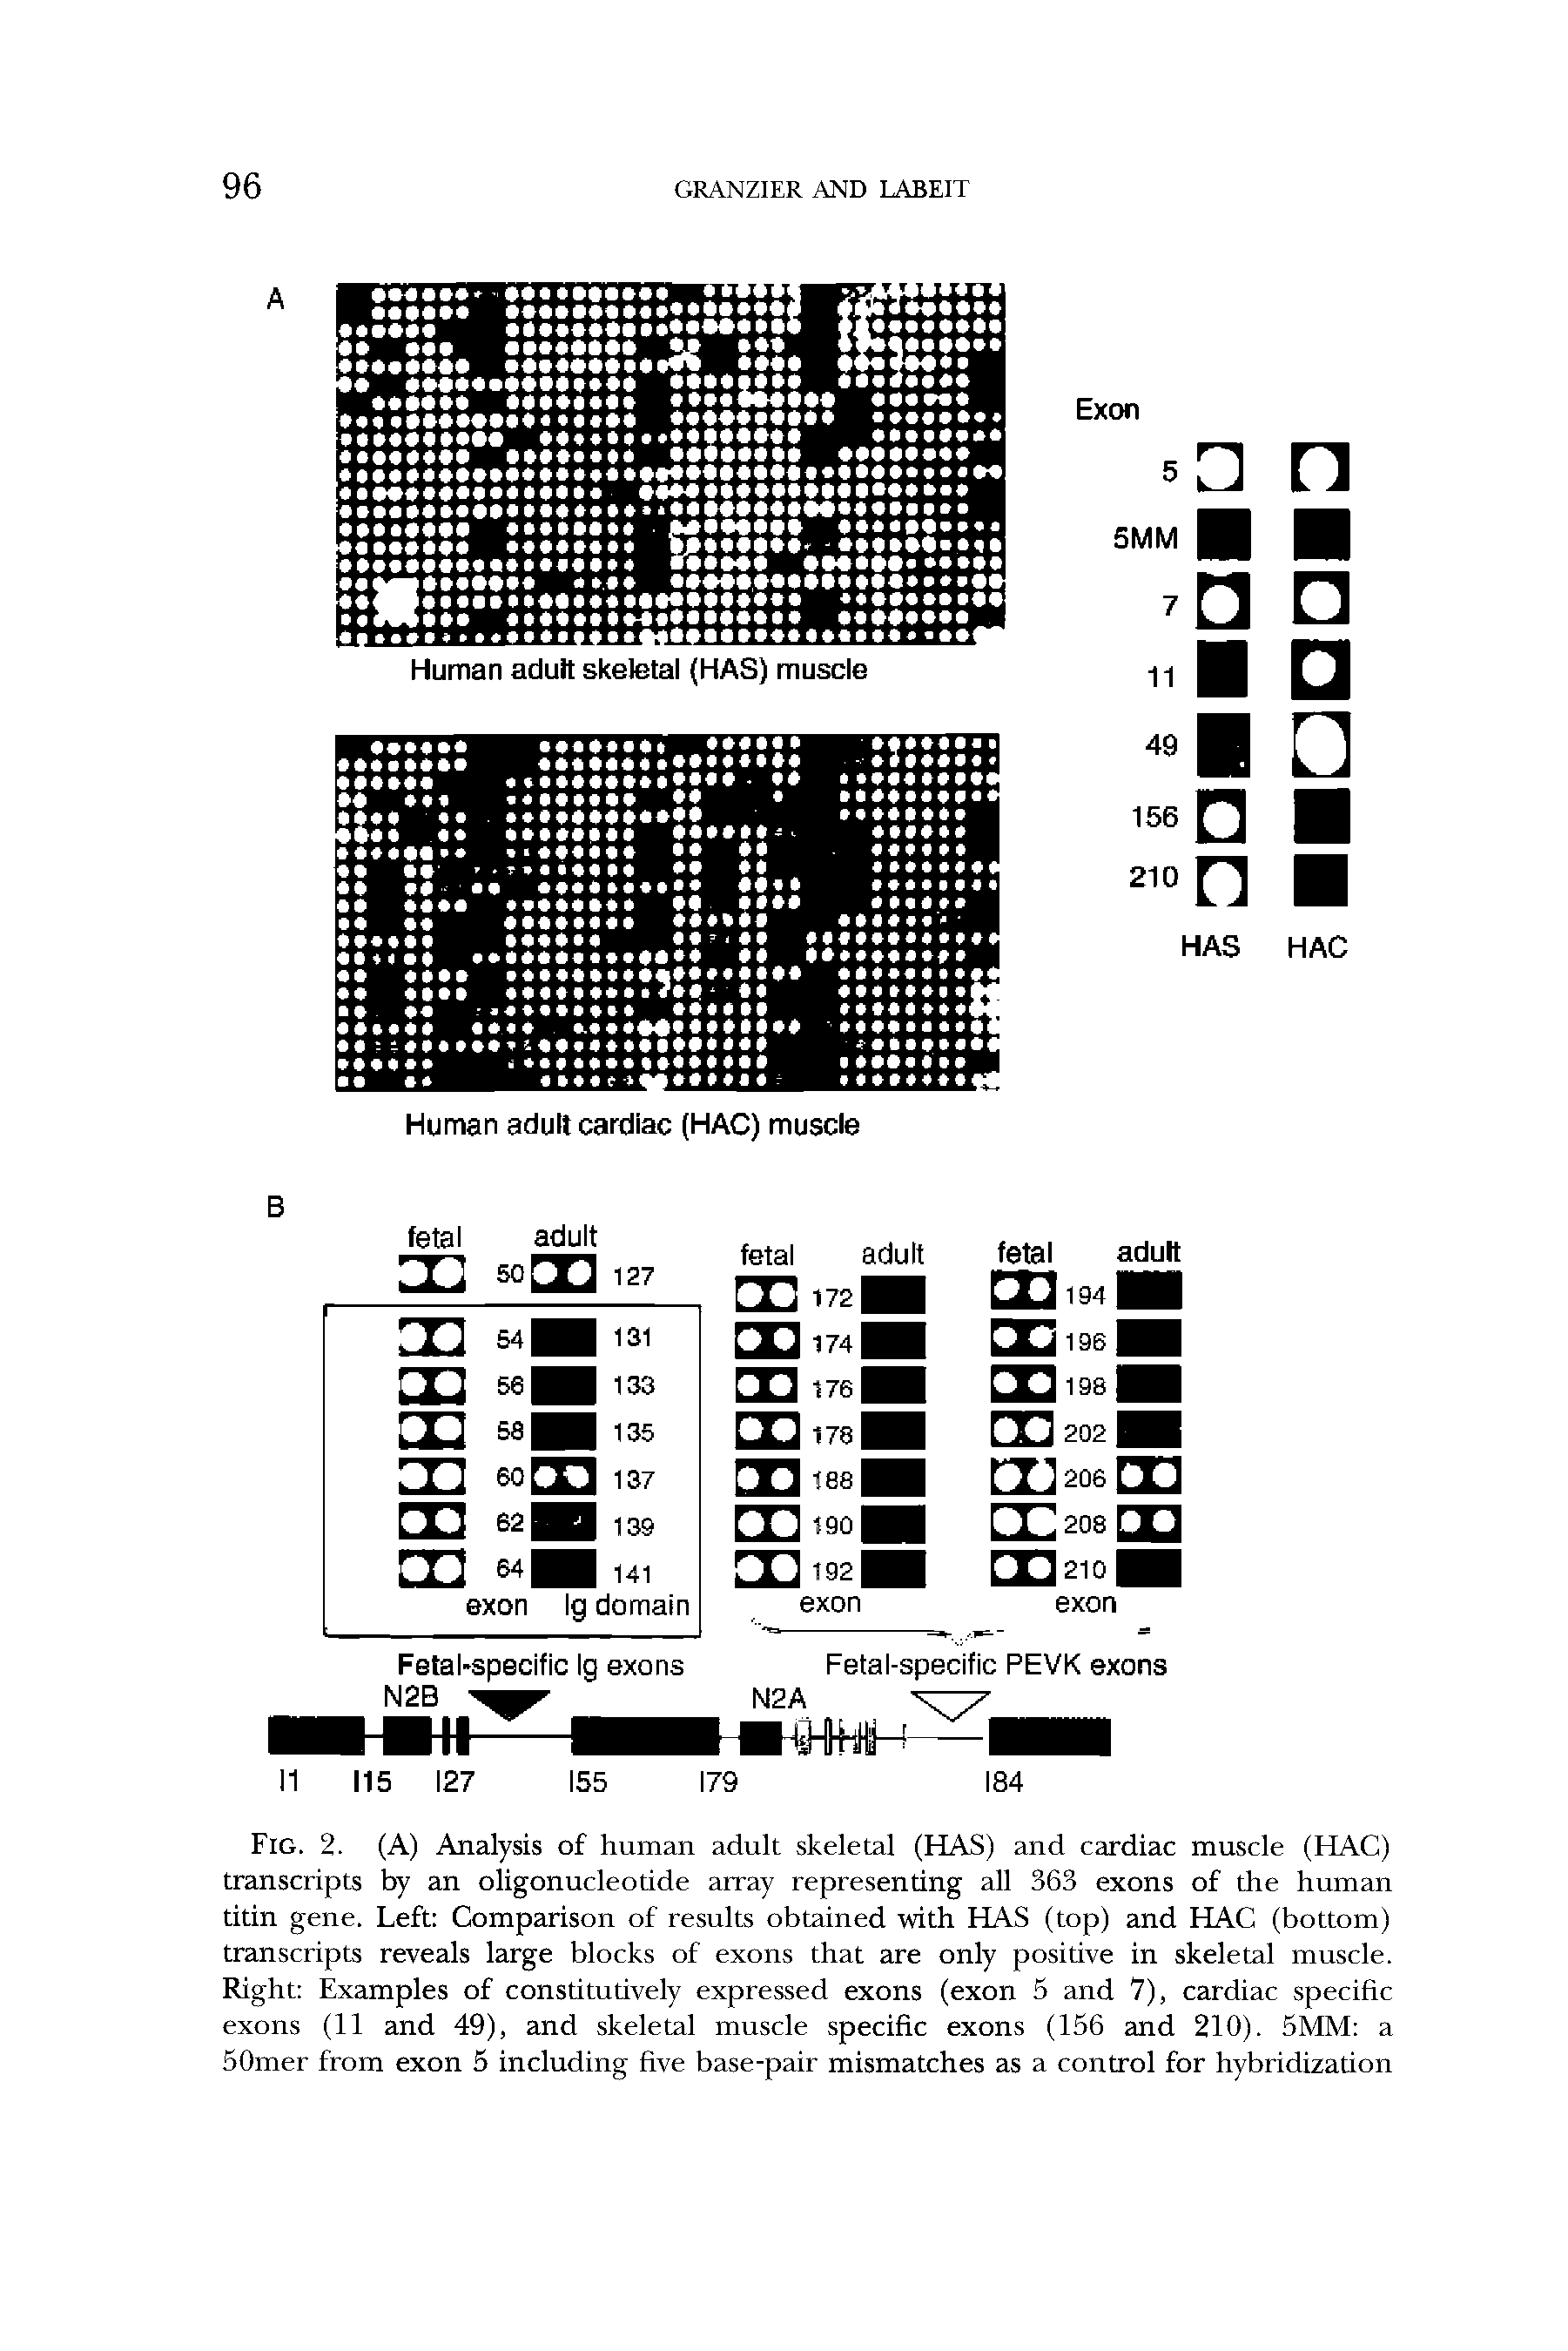 Fig. 2. (A) Analysis of human adult skeletal (HAS) and cardiac muscle (HAC) transcripts by an oligonucleotide array representing all 363 exons of the human titin gene. Left Comparison of results obtained with HAS (top) and HAC (bottom) transcripts reveals large blocks of exons that are only positive in skeletal muscle. Right Examples of constitutively expressed exons (exon 5 and 7), cardiac specific exons (11 and 49), and skeletal muscle specific exons (156 and 210). 5MM a 50mer from exon 5 including five base-pair mismatches as a control for hybridization...